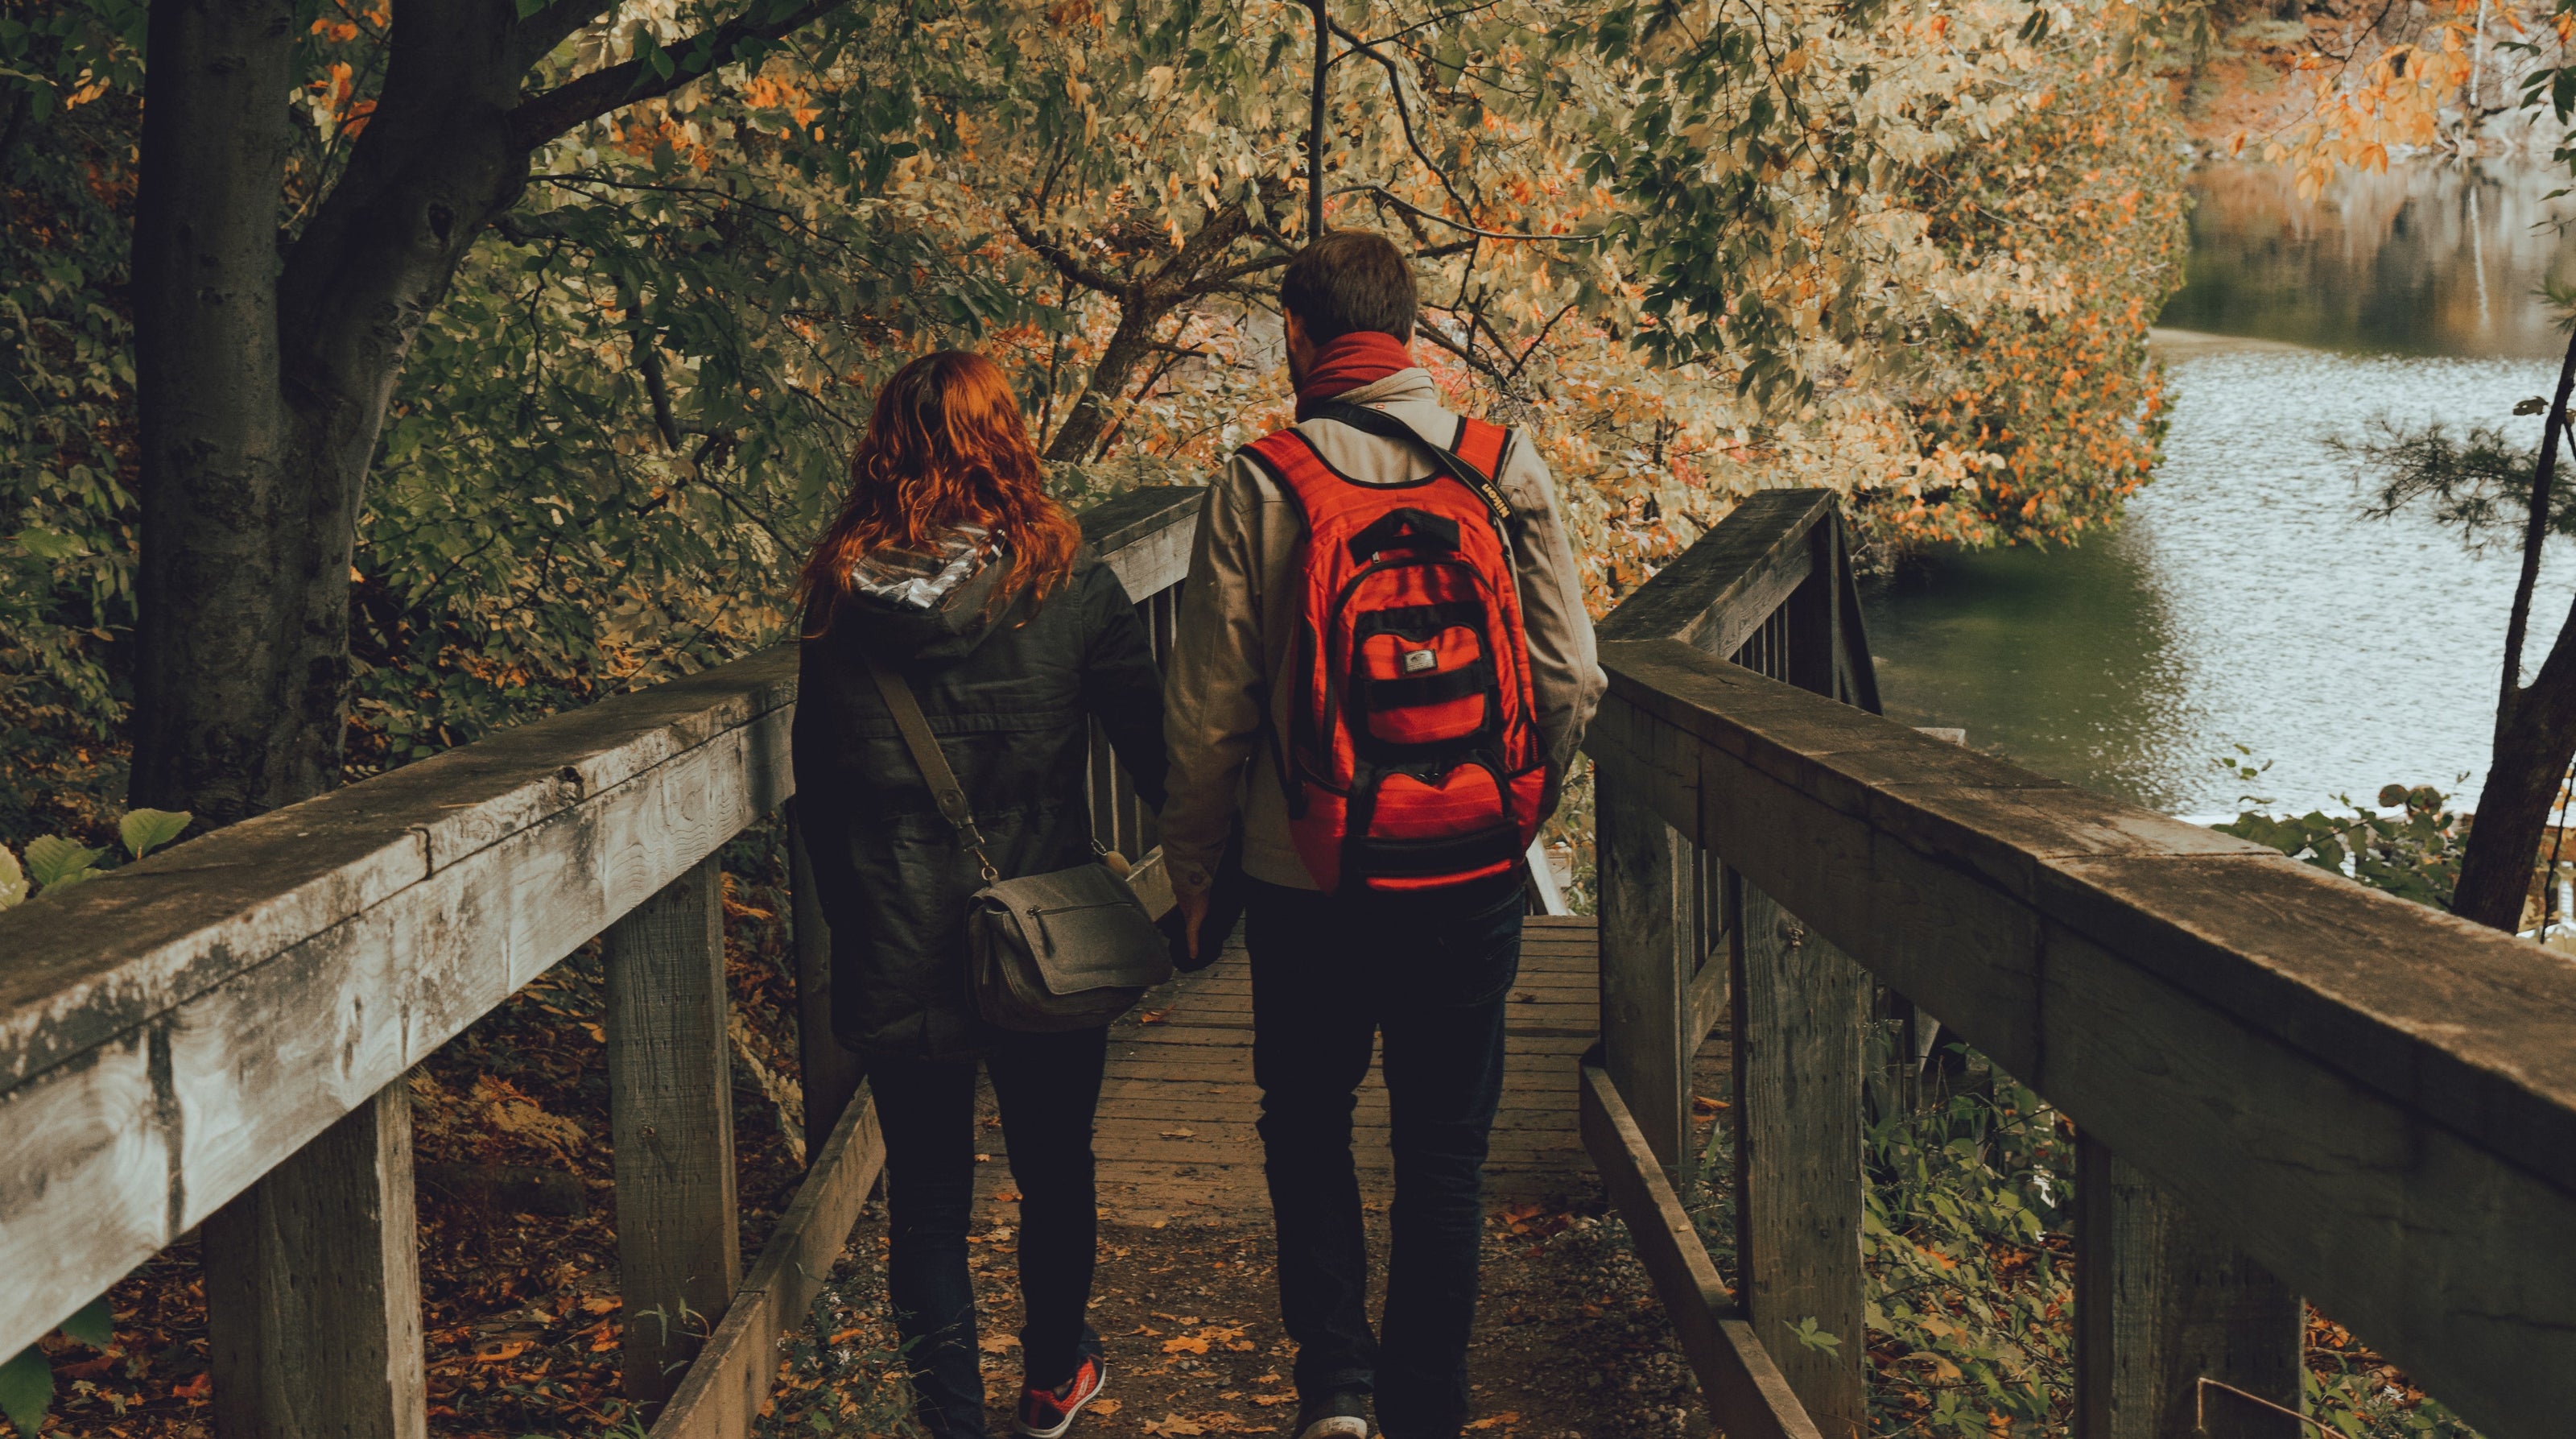 Healthy couple walking in nature